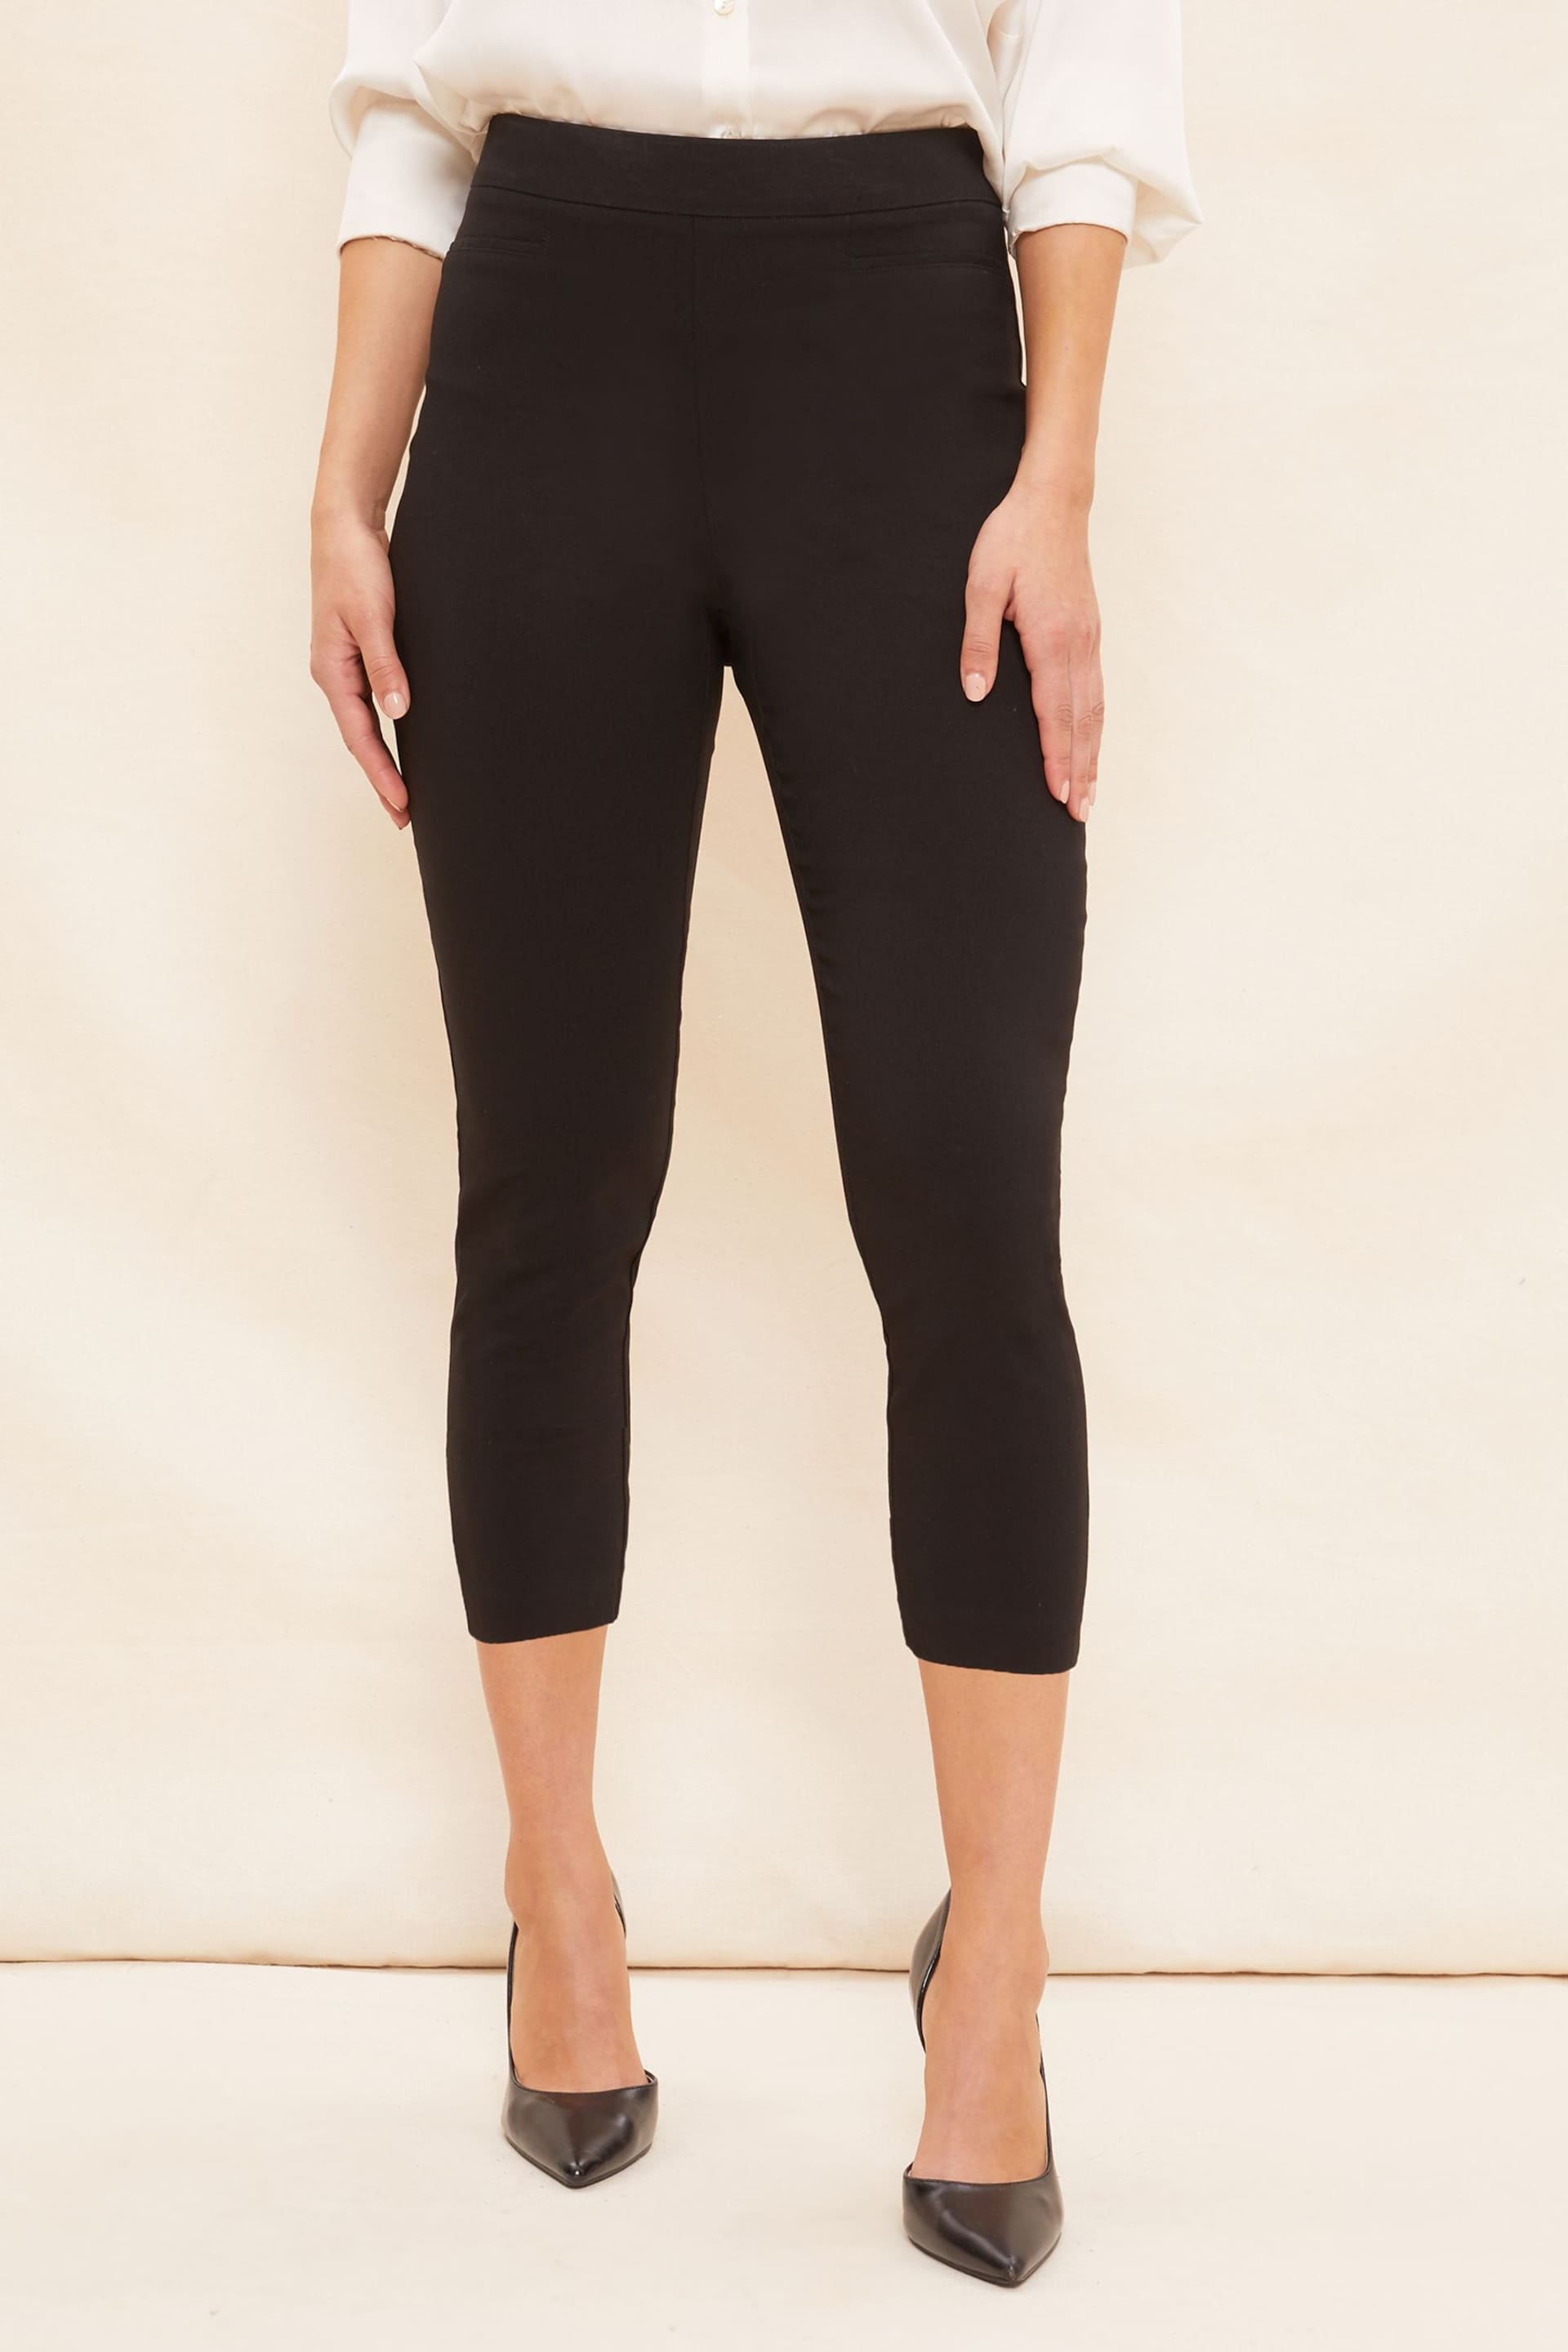 Friends Like These Black Cropped Comfort Stretch Trousers - Image 1 of 4